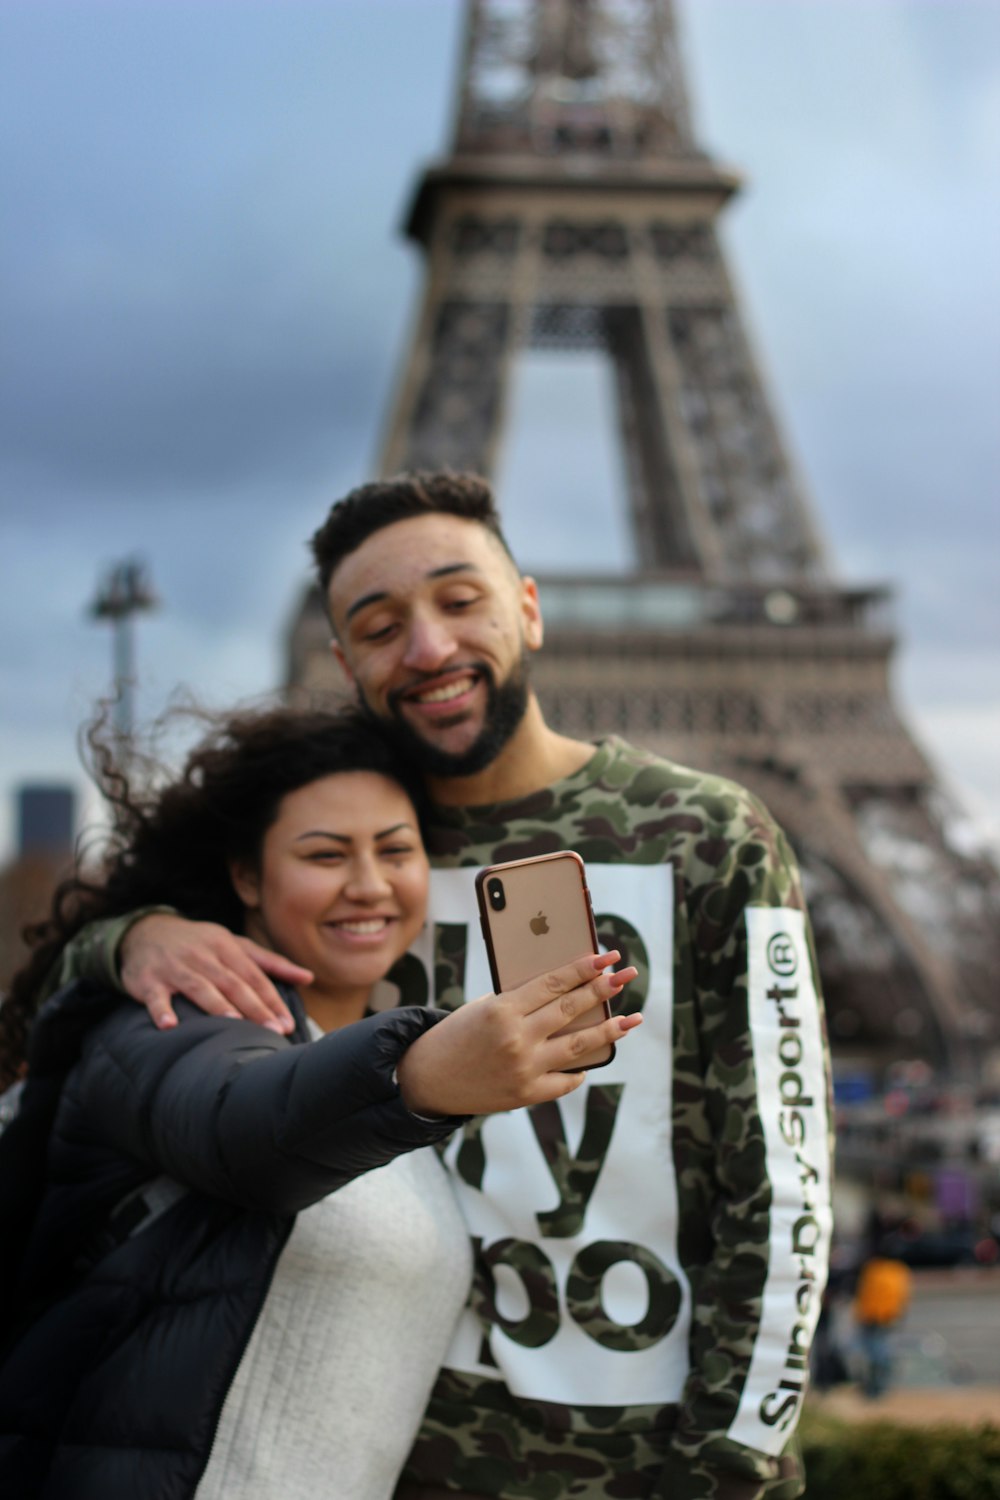 man and woman taking picture near Eiffel Tower in Paris